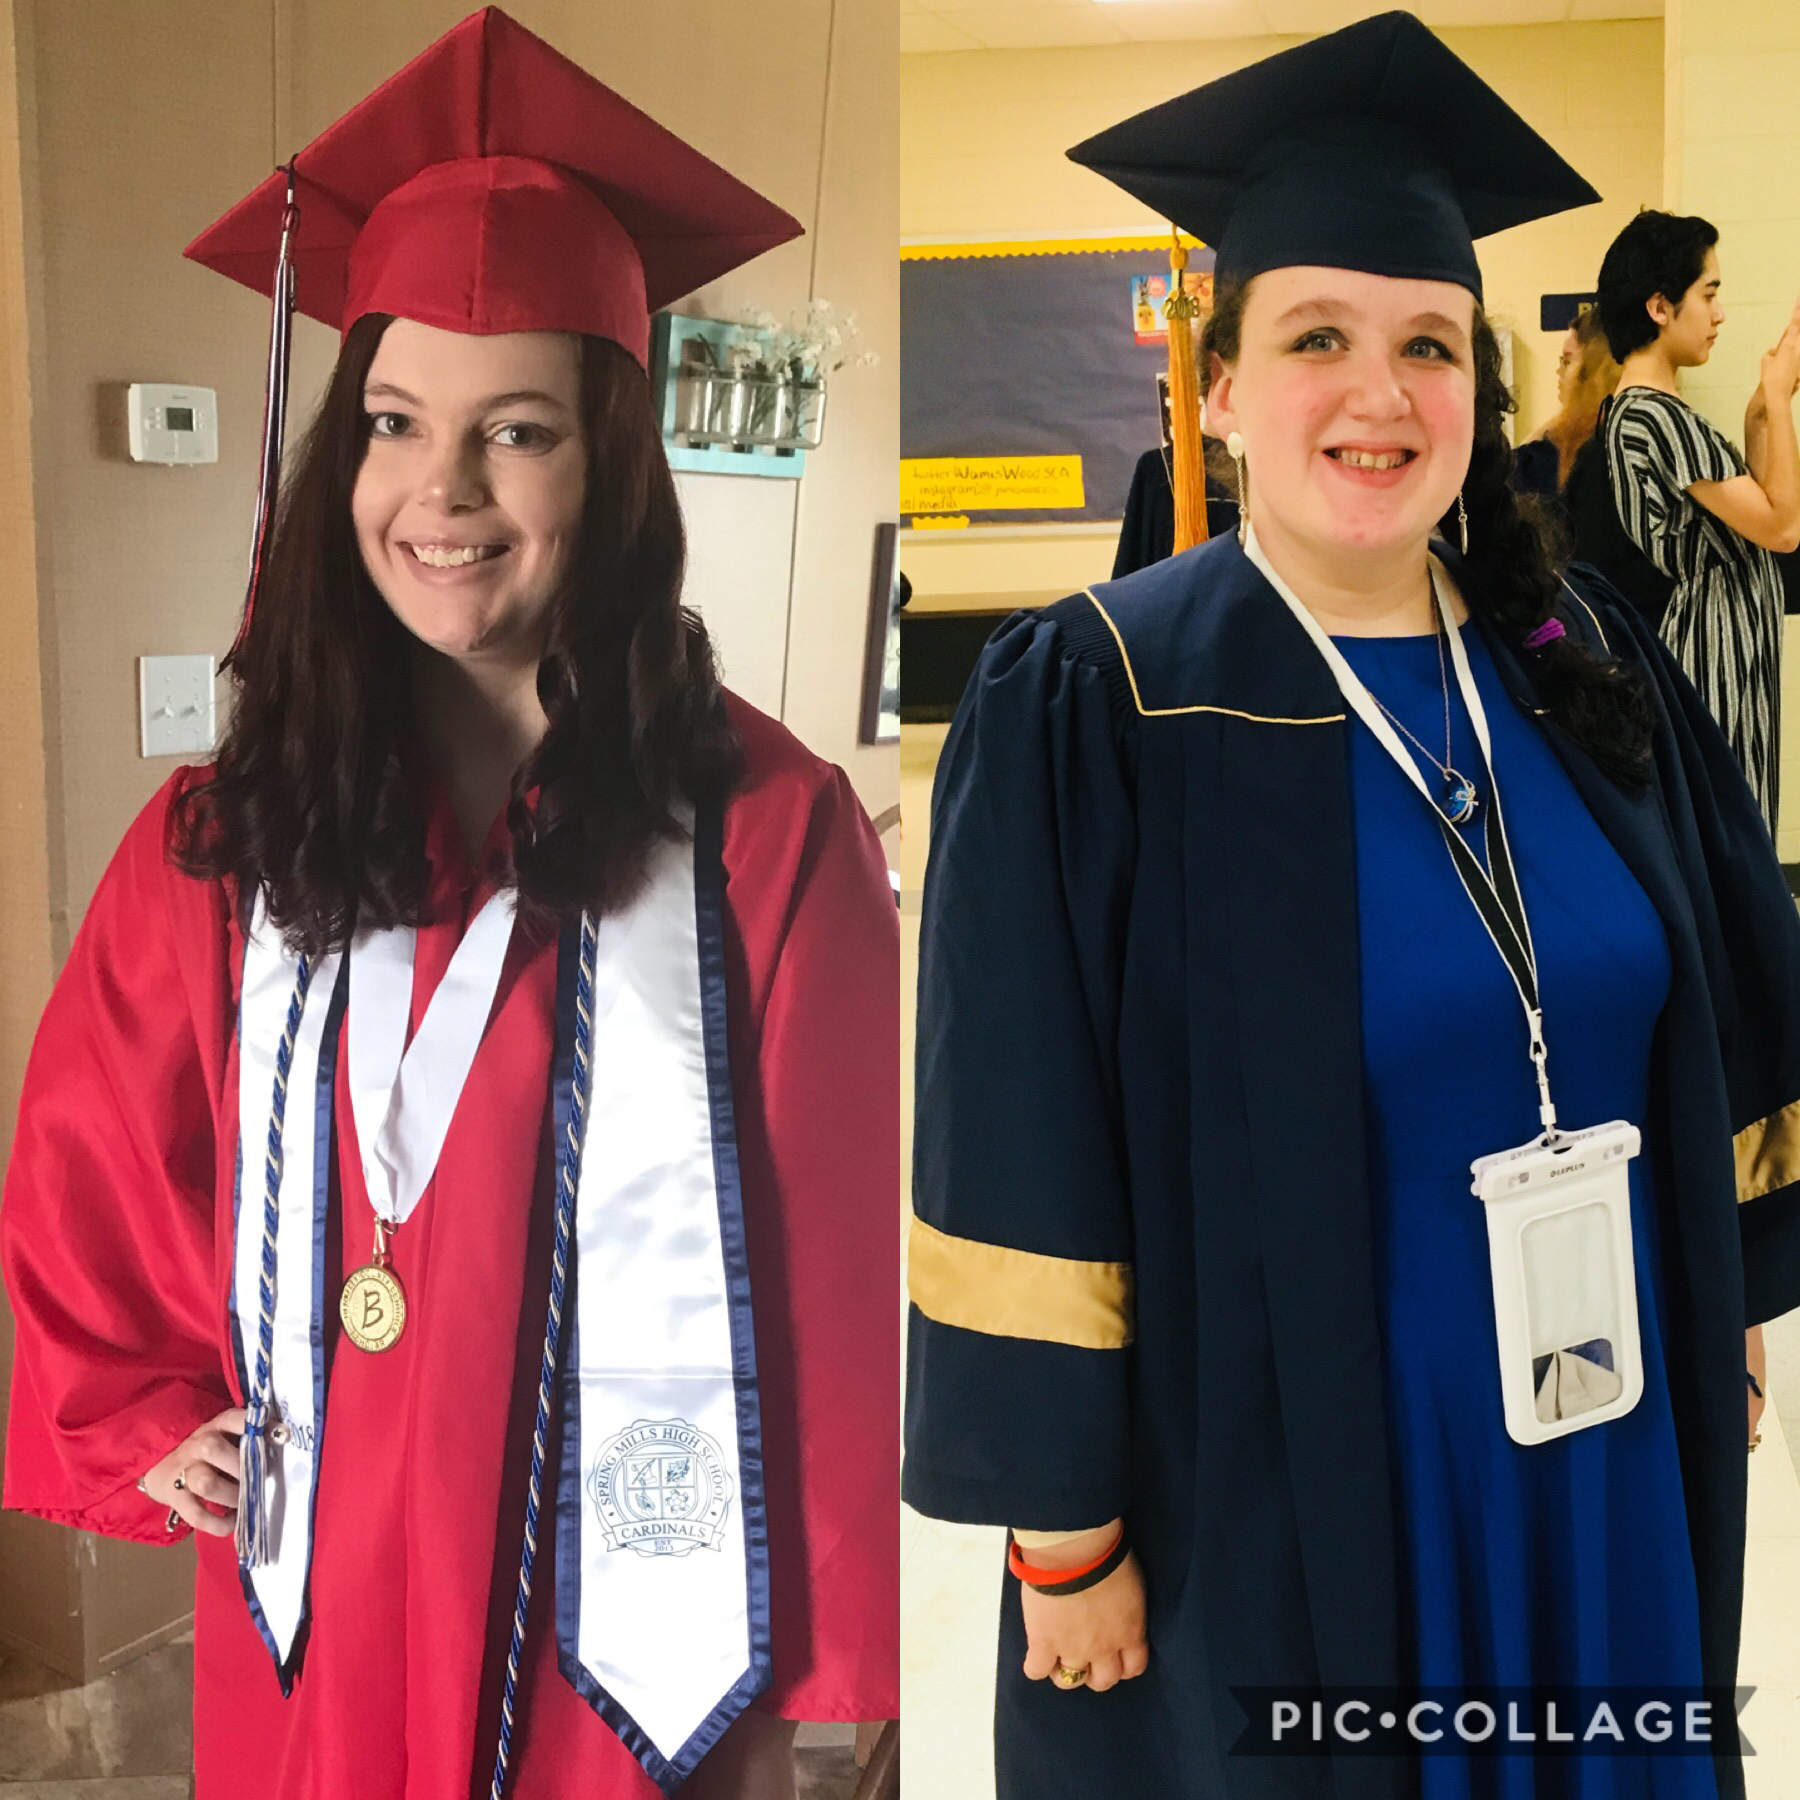 Pictures from our graduation day
SMHS~5-29-18
JWHS~6-3-18